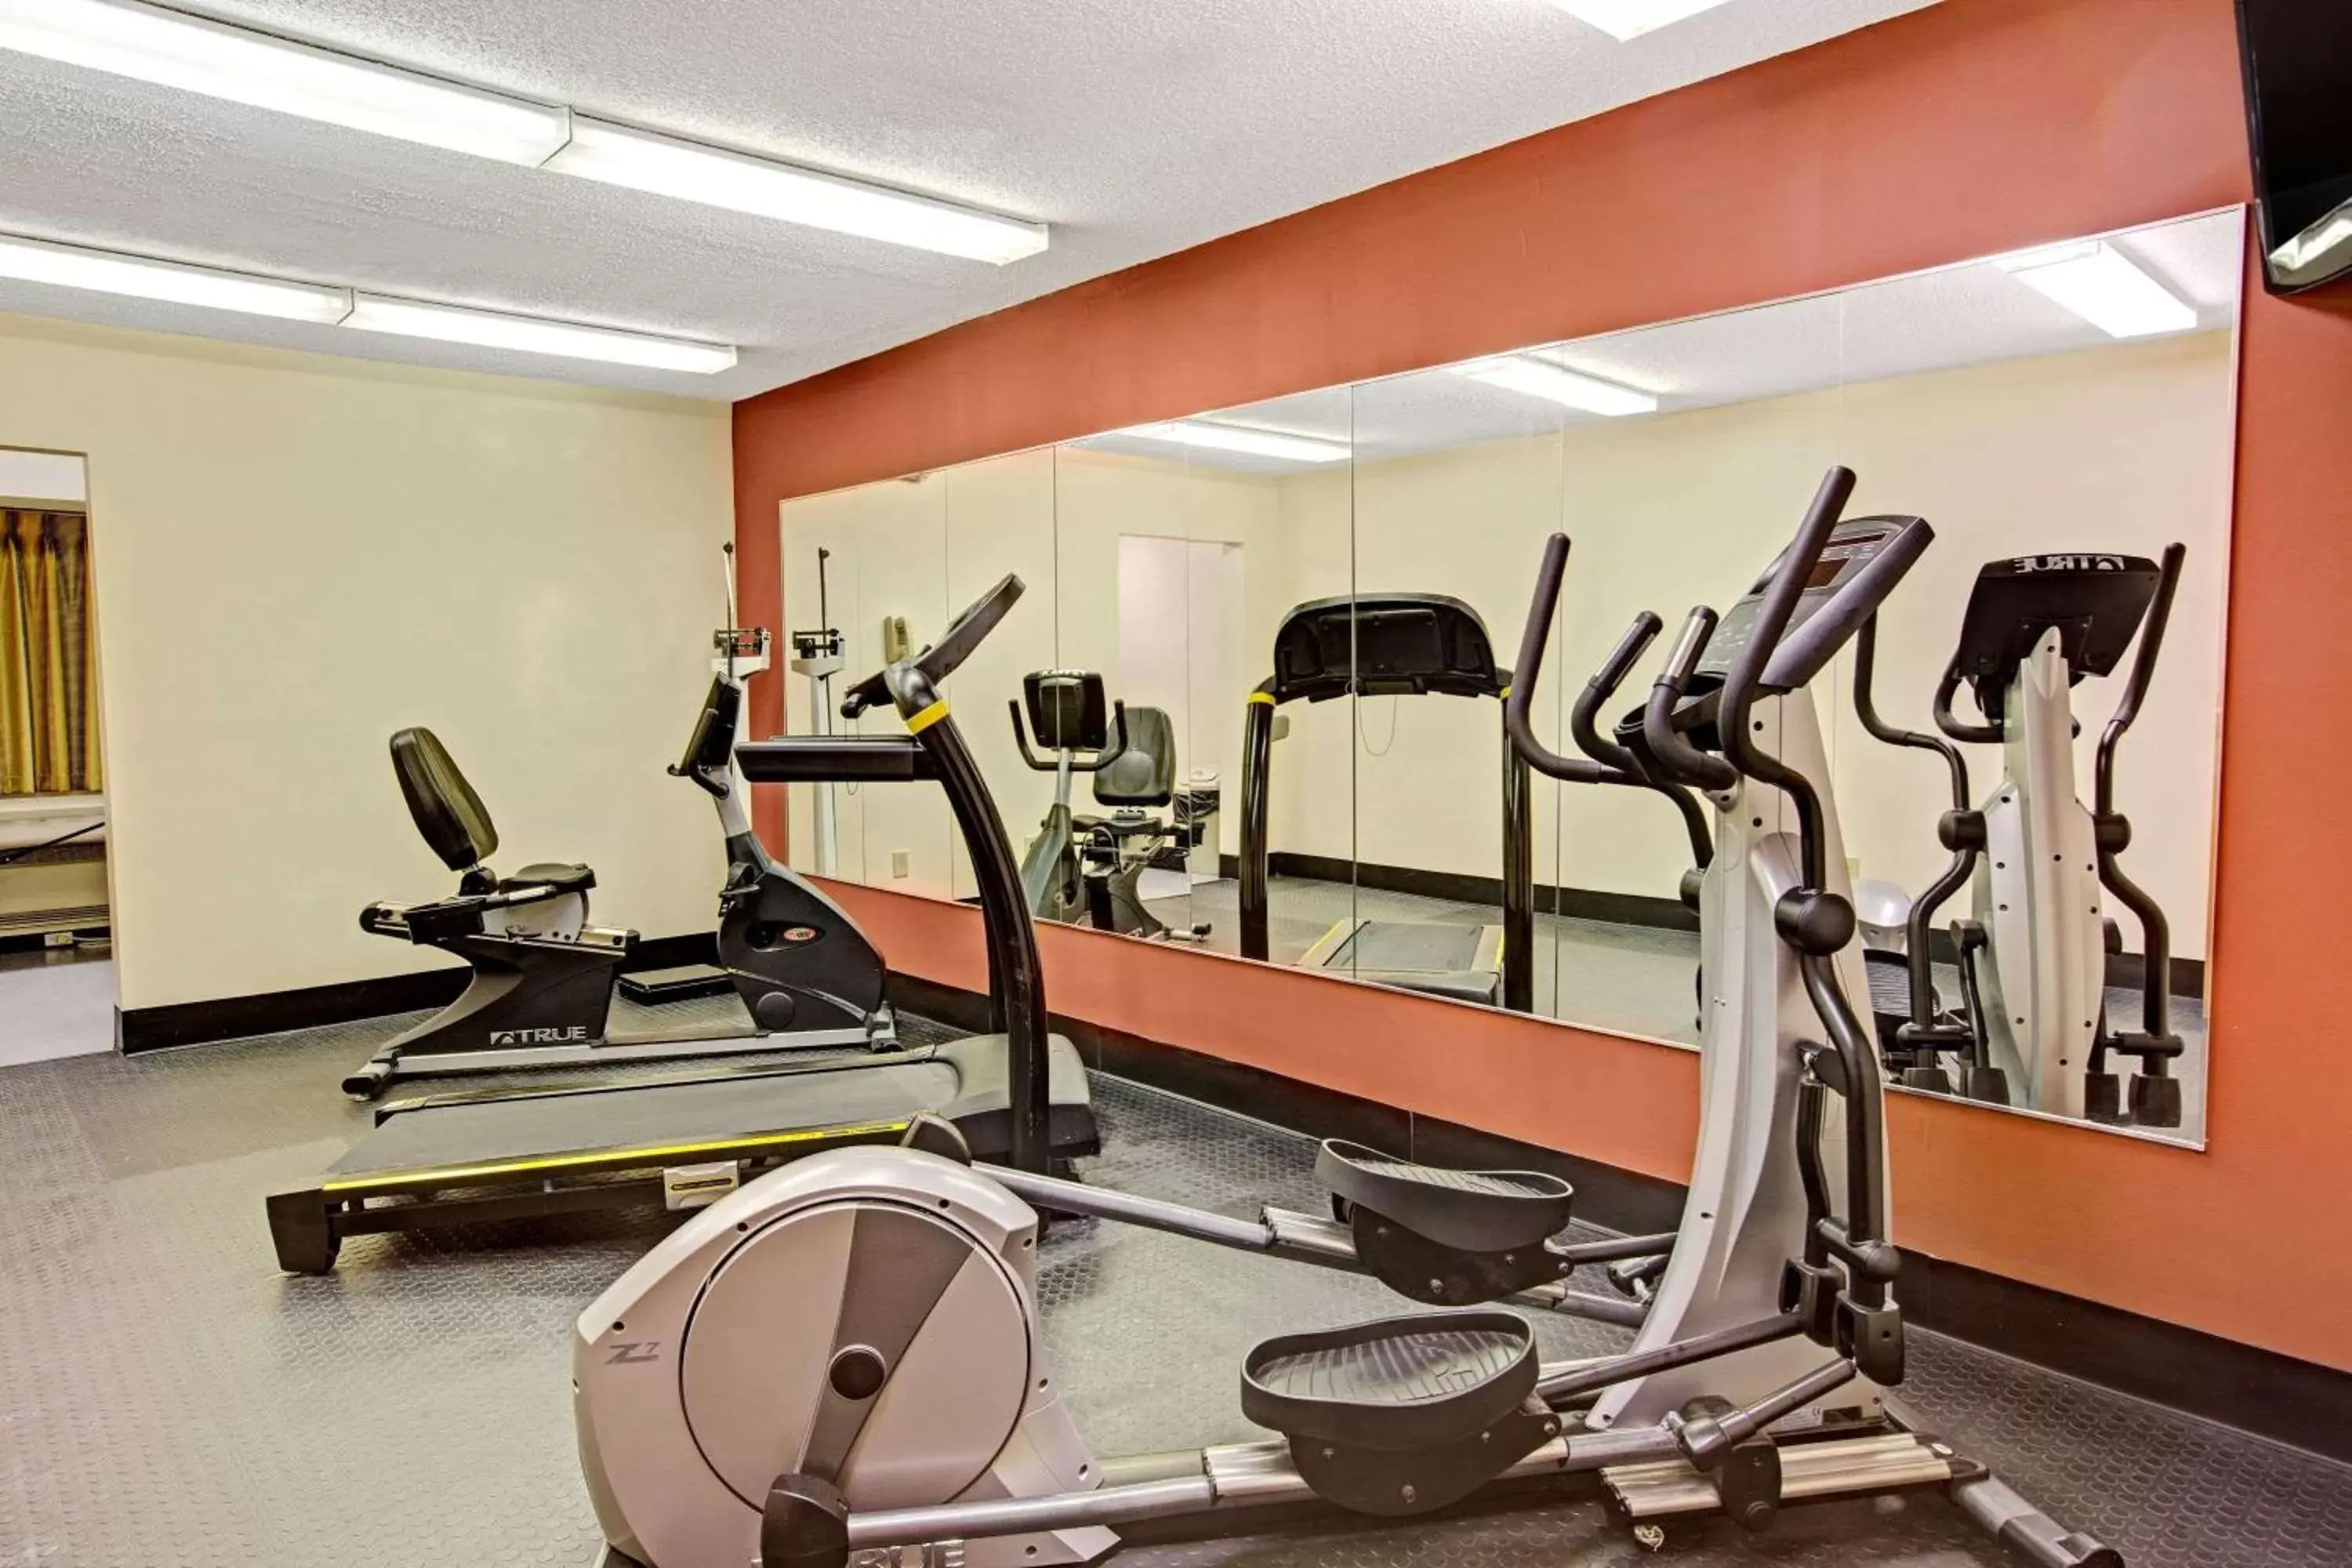 Fitness centre/facilities, Fitness Center/Facilities in Microtel Inn & Suites by Wyndham Statesville